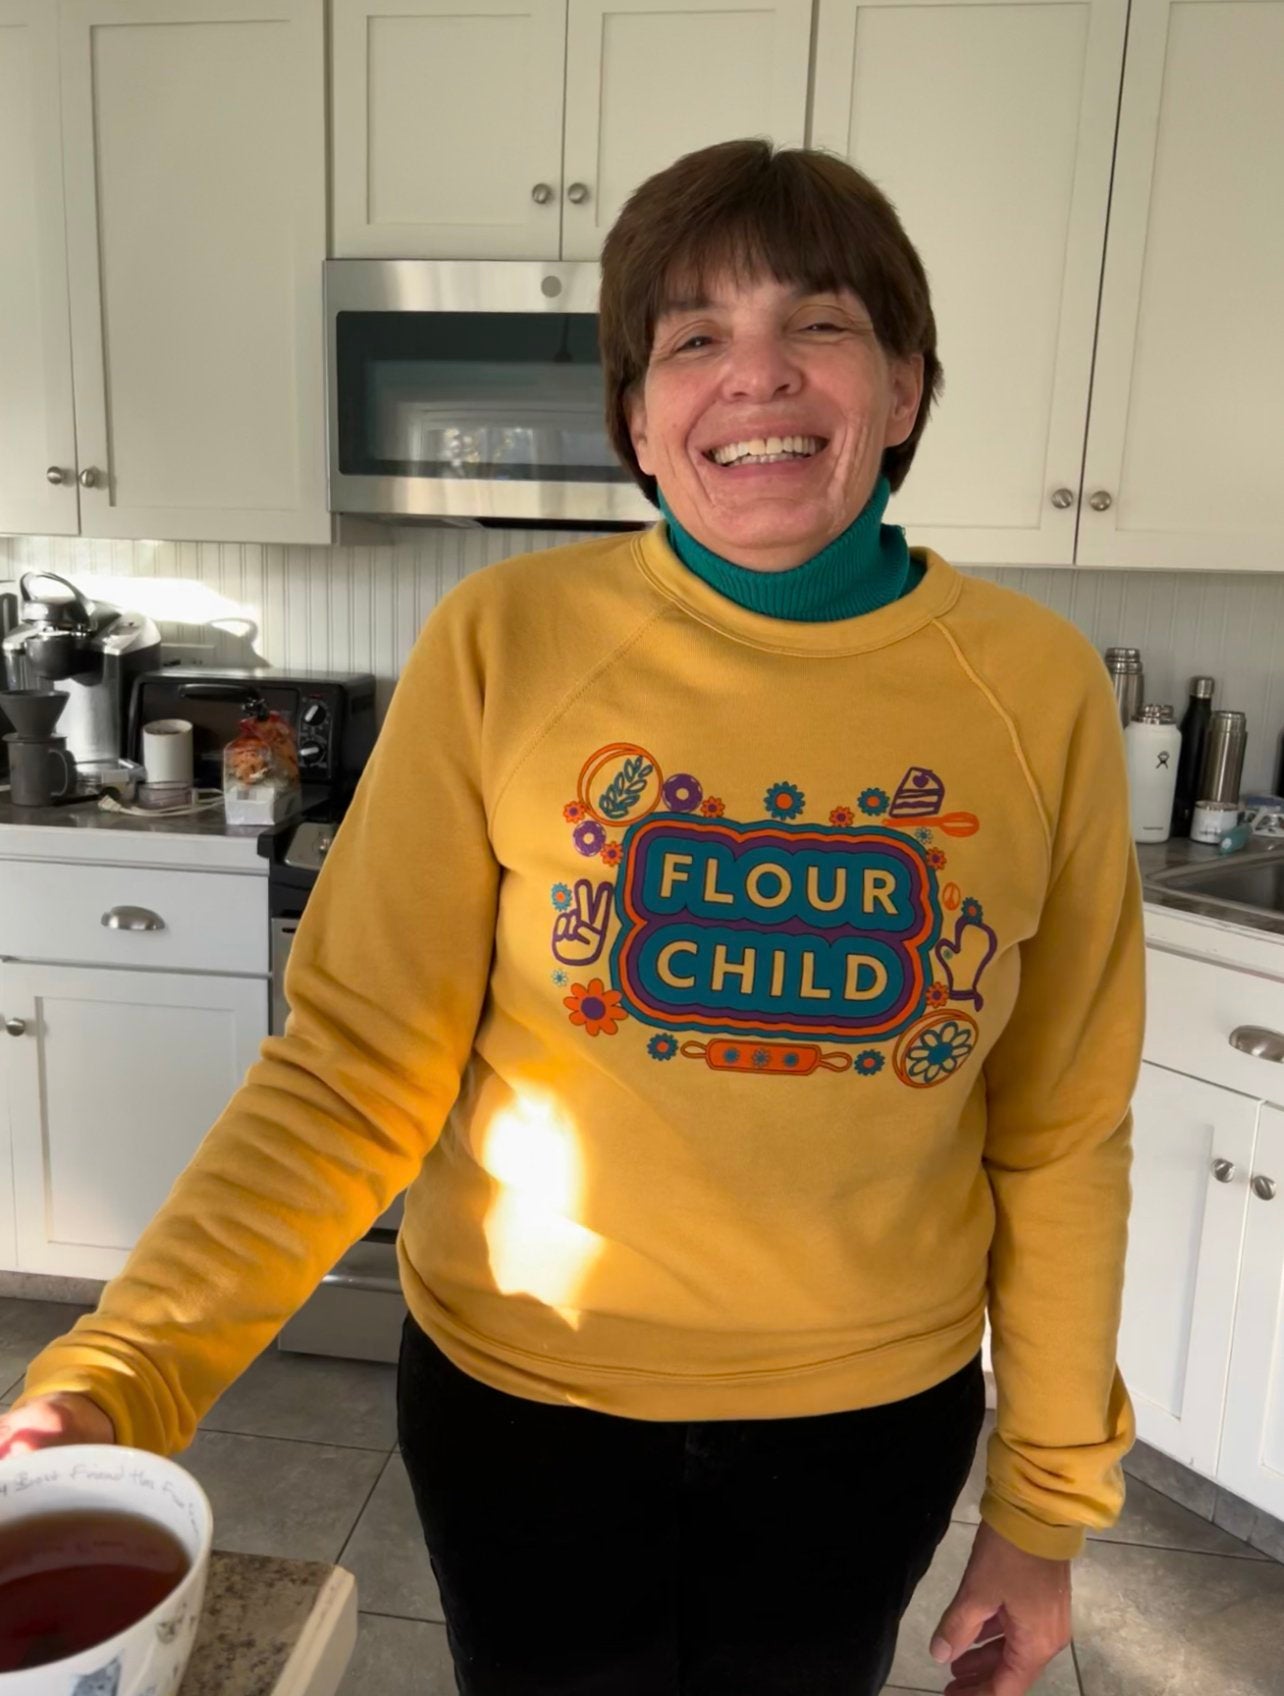 A woman holding a cup of tea smiles wearing the yellow Flour Child crewneck over a green turtleneck